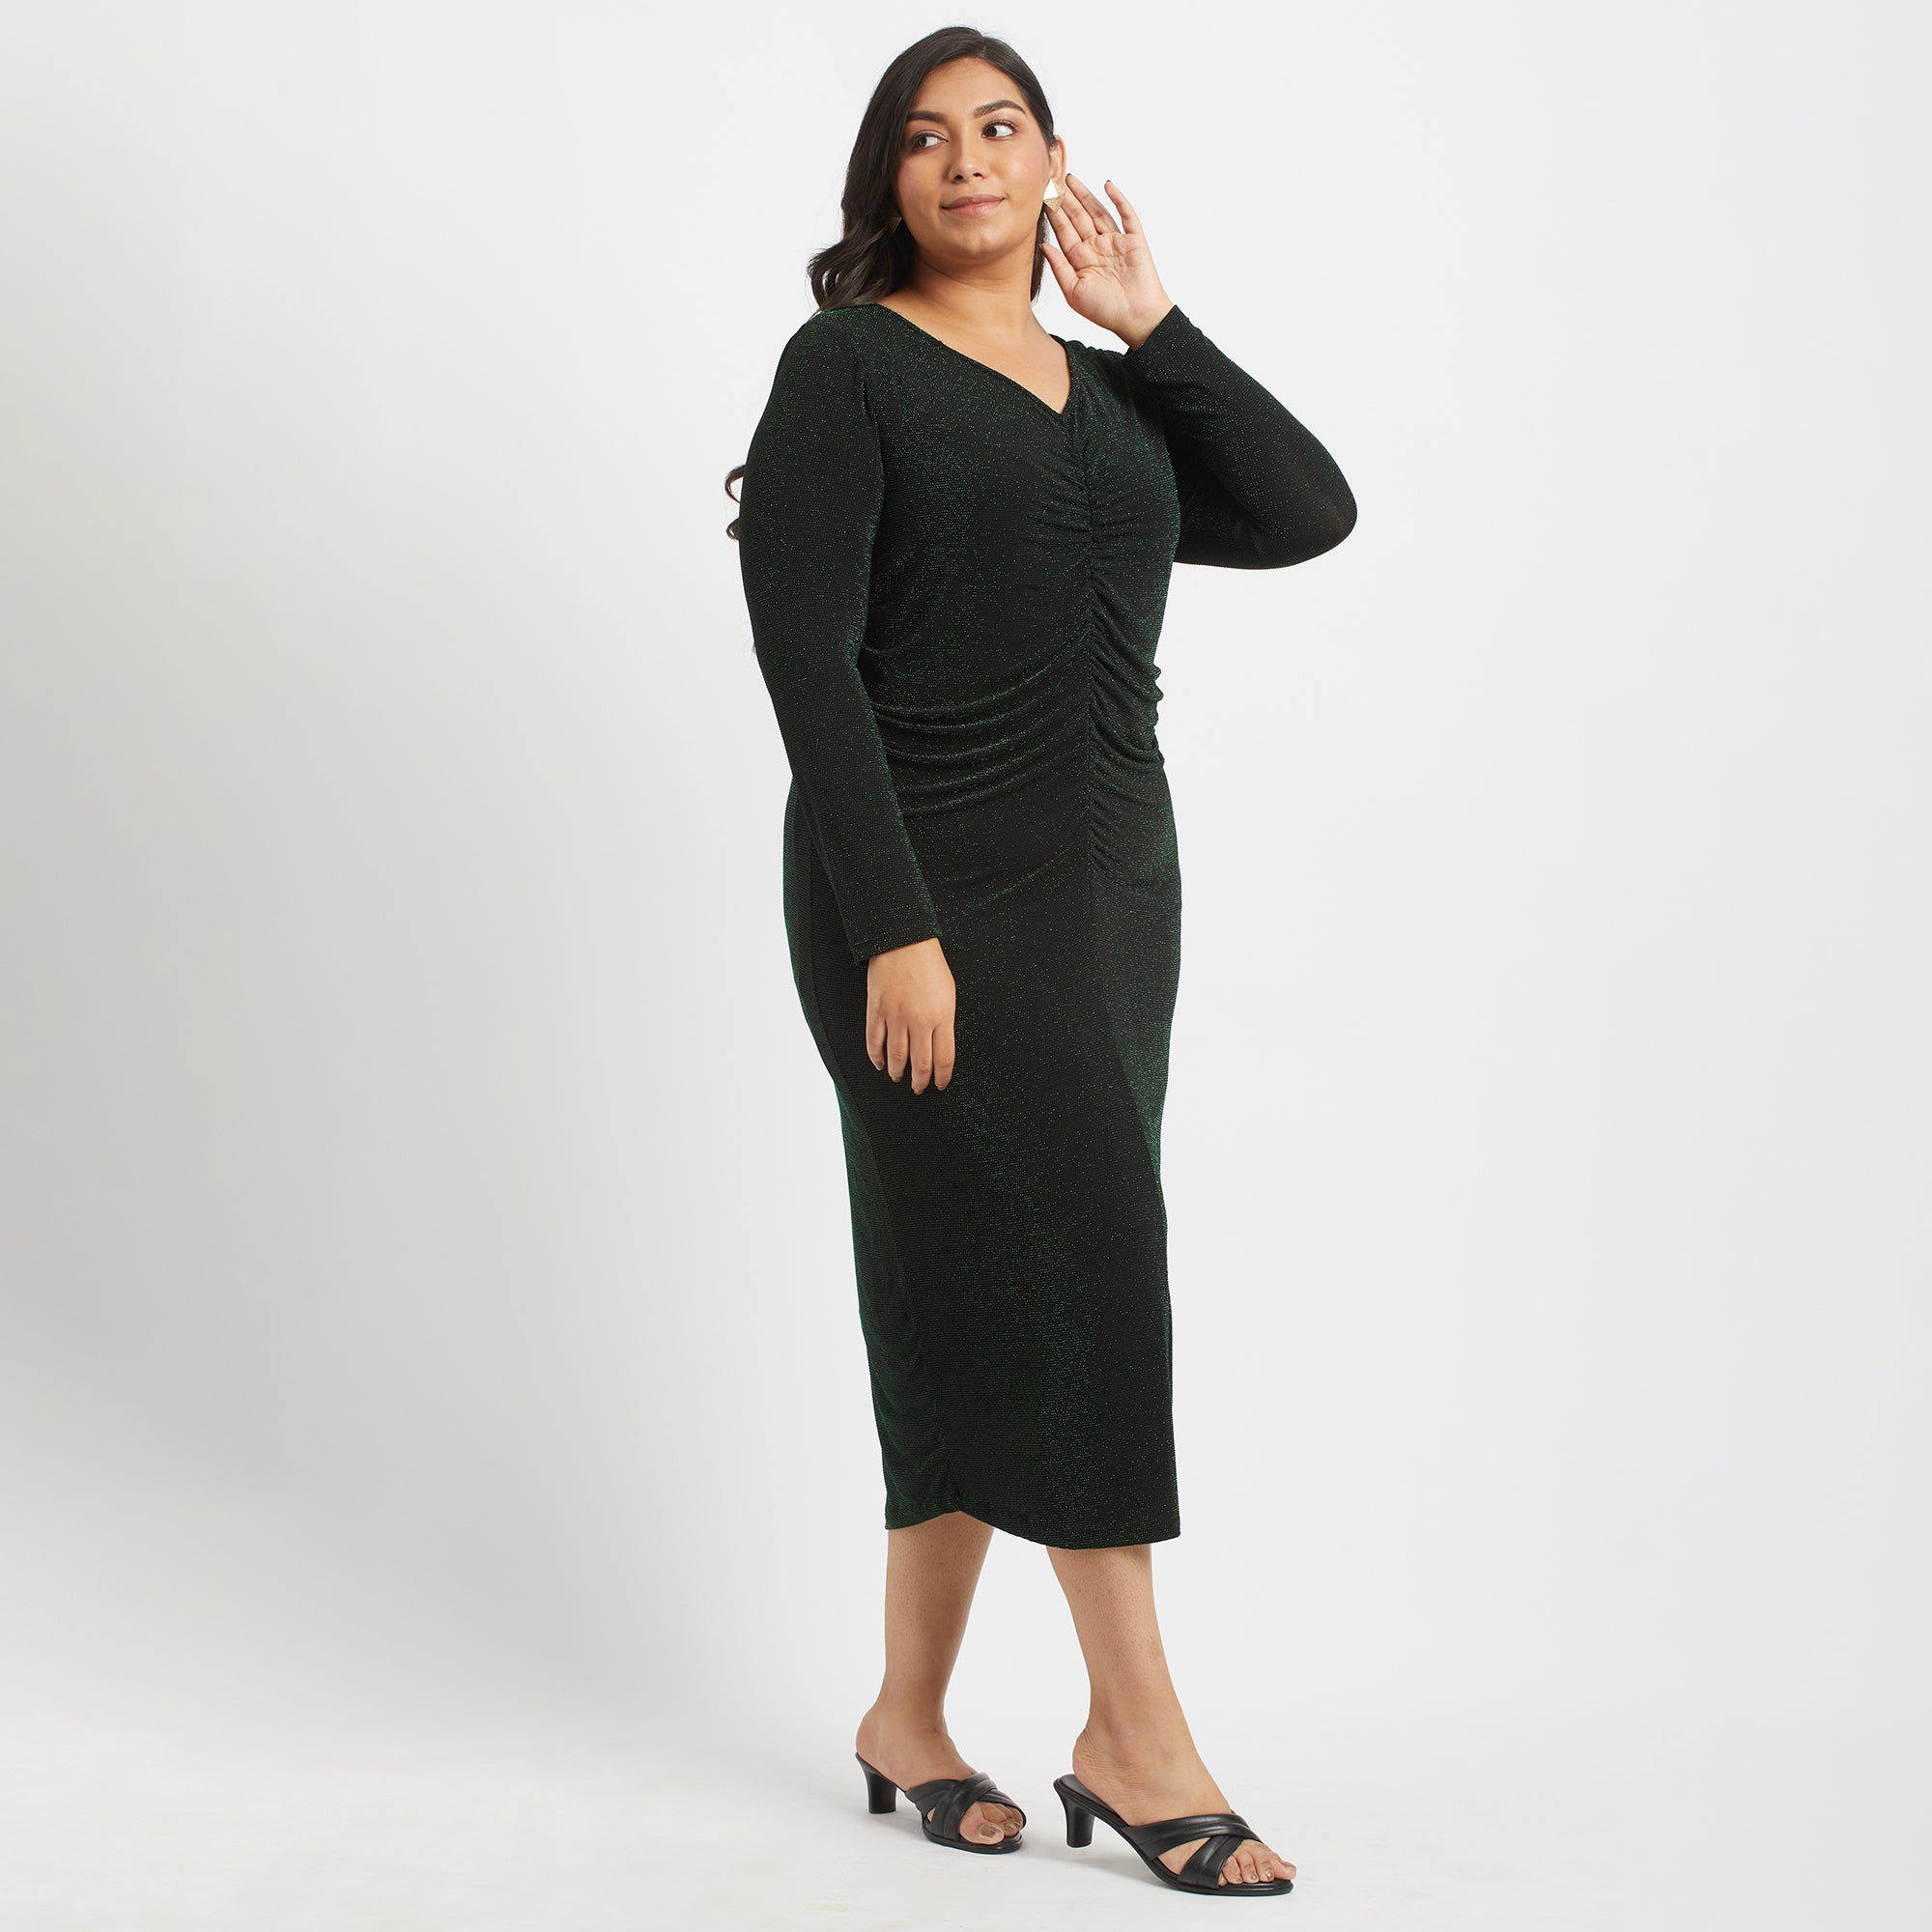 Emerald Essence Ruched Dress for Plus Size Women